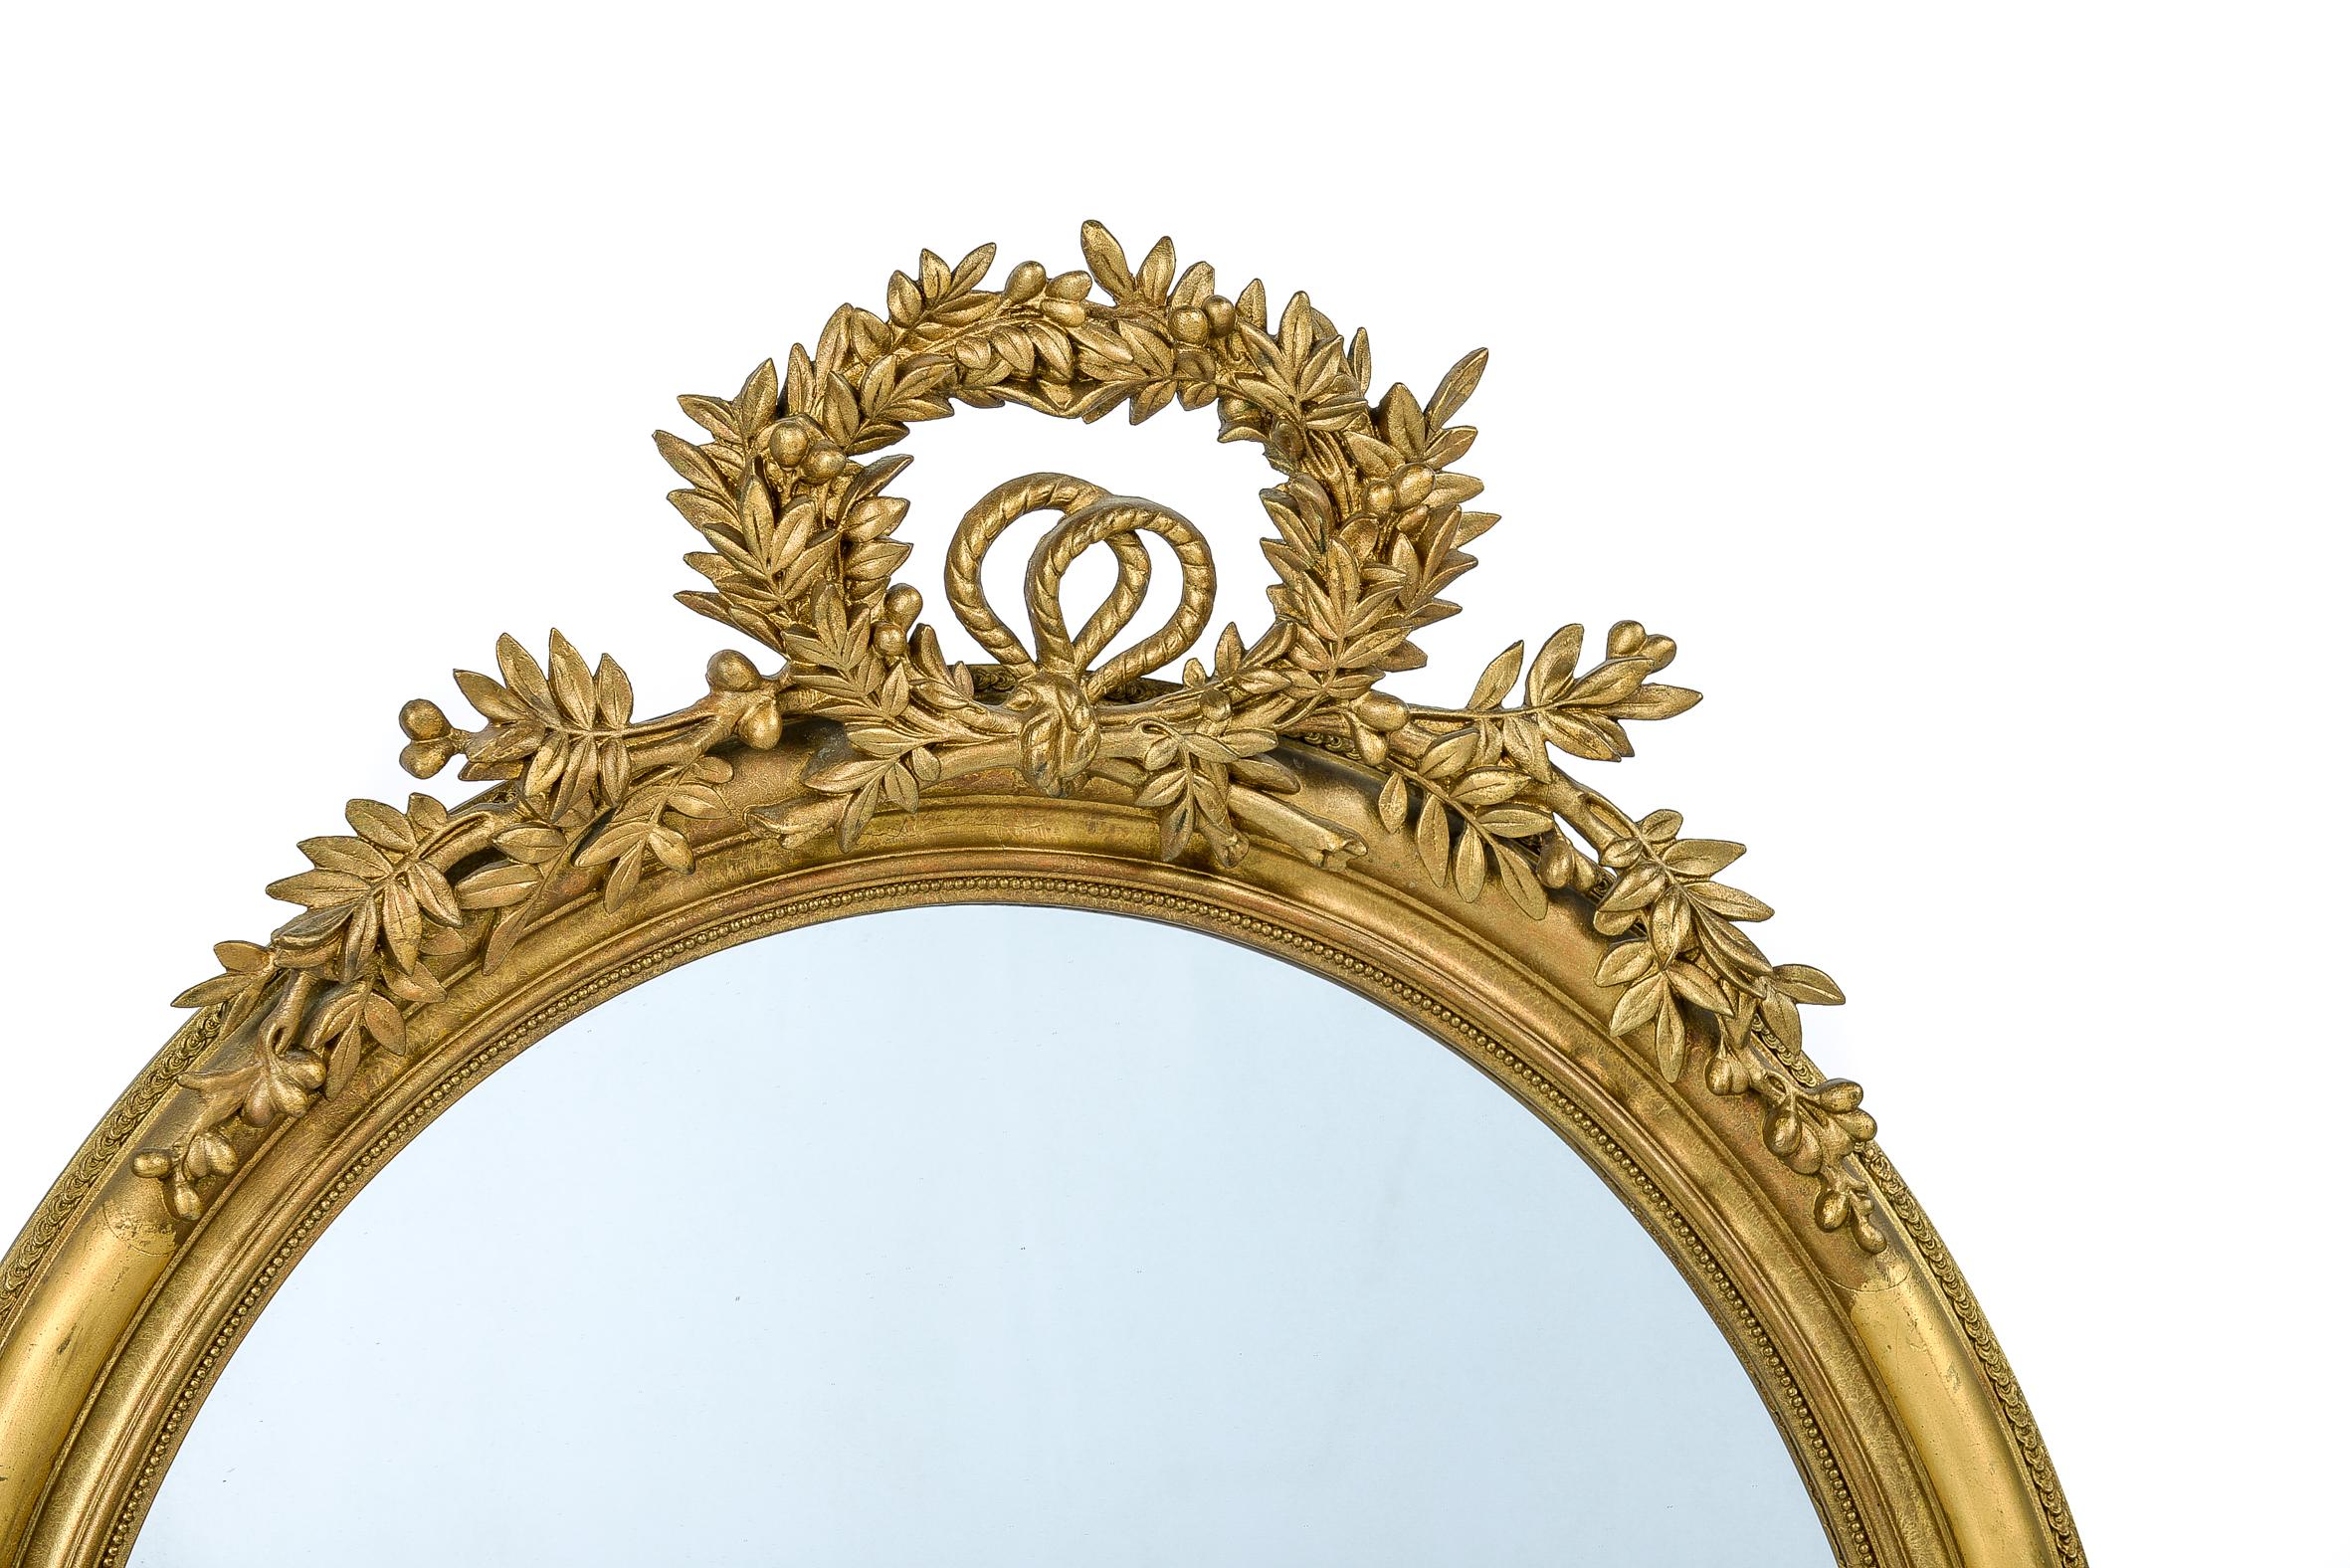 A beautiful antique French oval mirror that was made in France, circa 1880.
The mirror frame is decorated with an elegant top ornament. It features a berried laurel wreath tied together with a rope bow. Laurel has a very rich symbolic meaning in